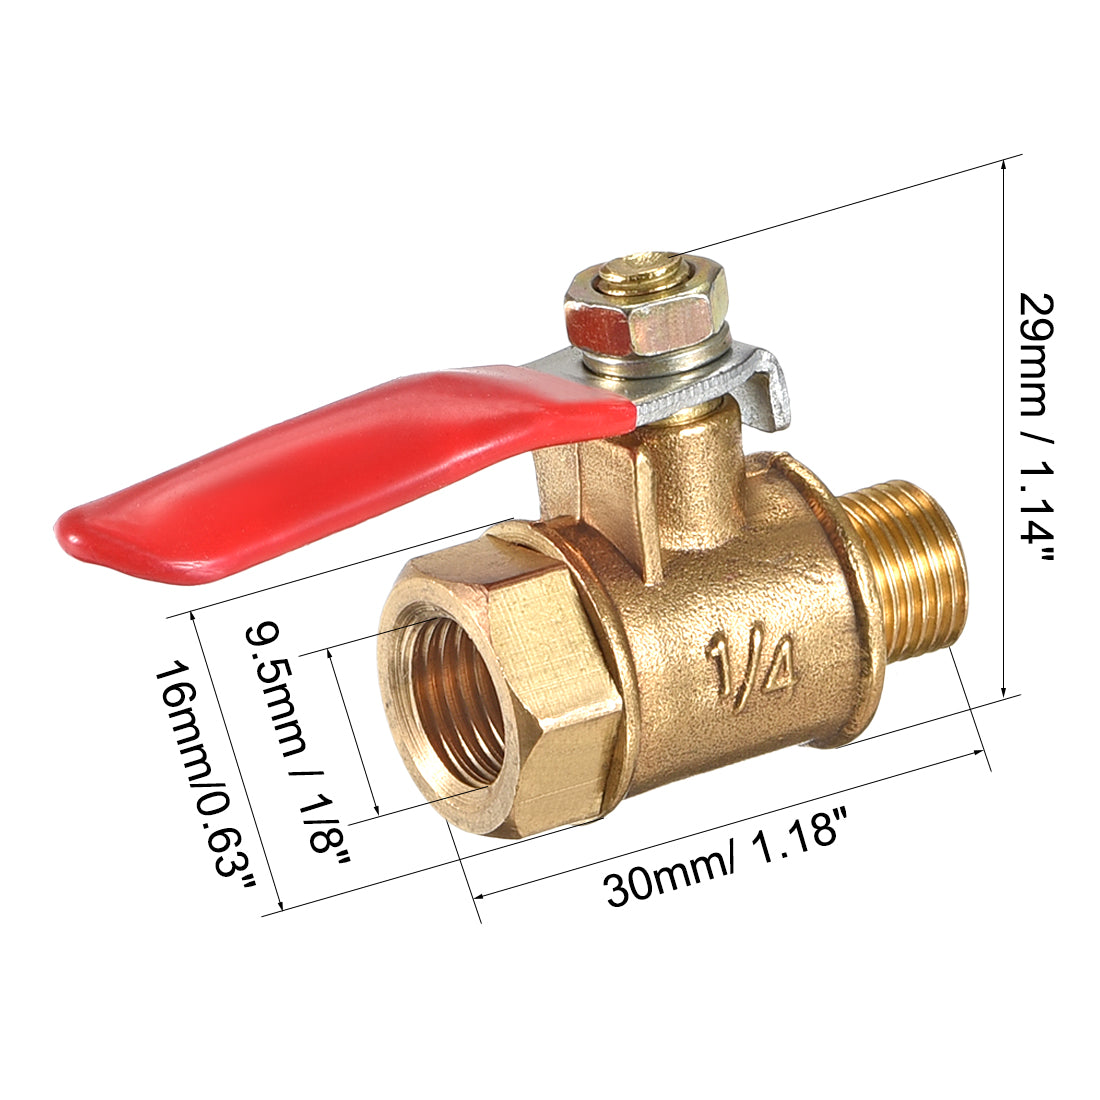 Uxcell Uxcell Brass Air Ball Valve Shut Off Switch G1/4 Male to Female Pipe accoupler